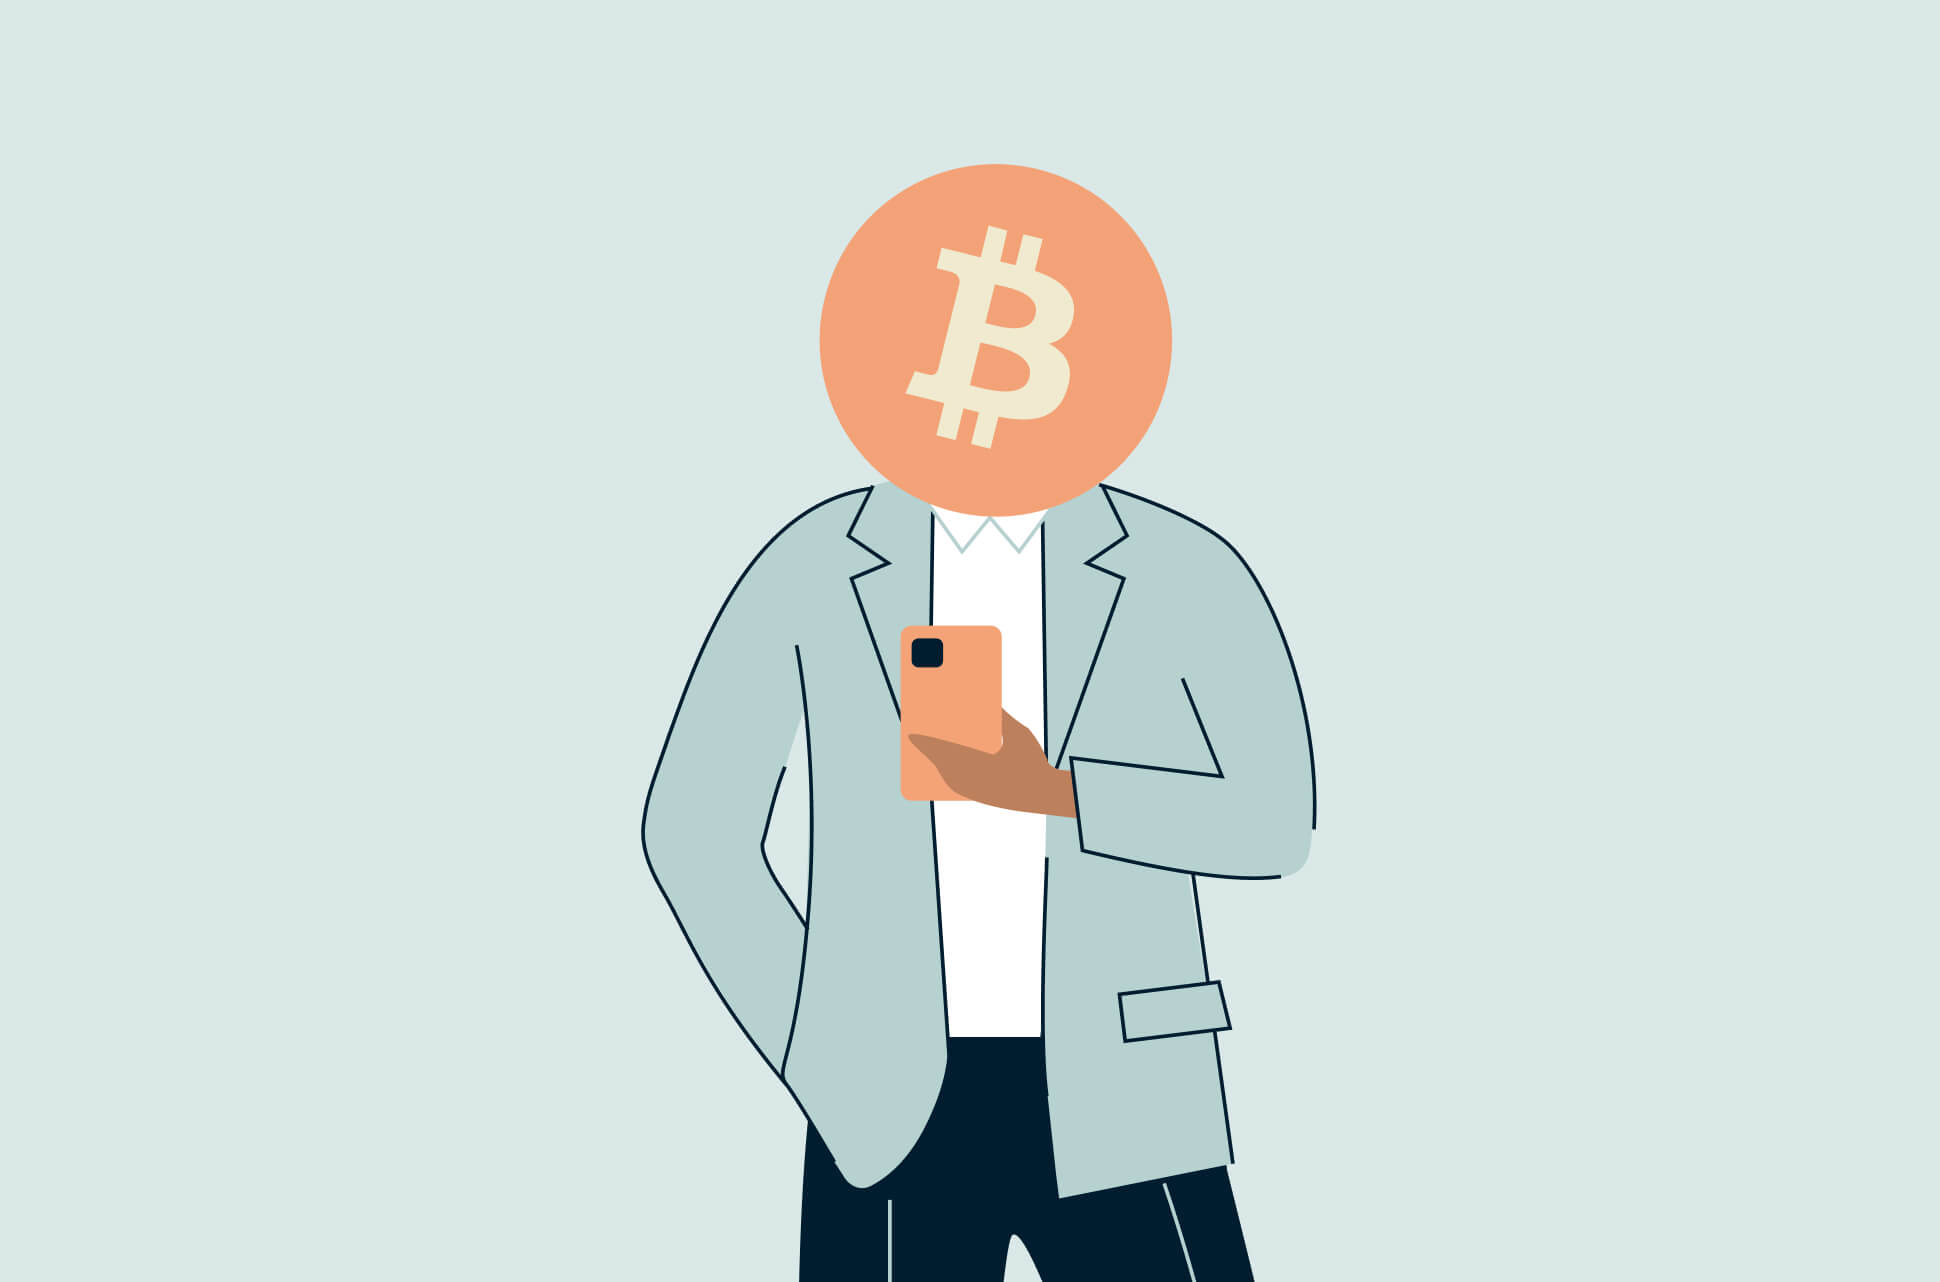 Is Bitcoin Anonymous? NO! It's Pseudonymous